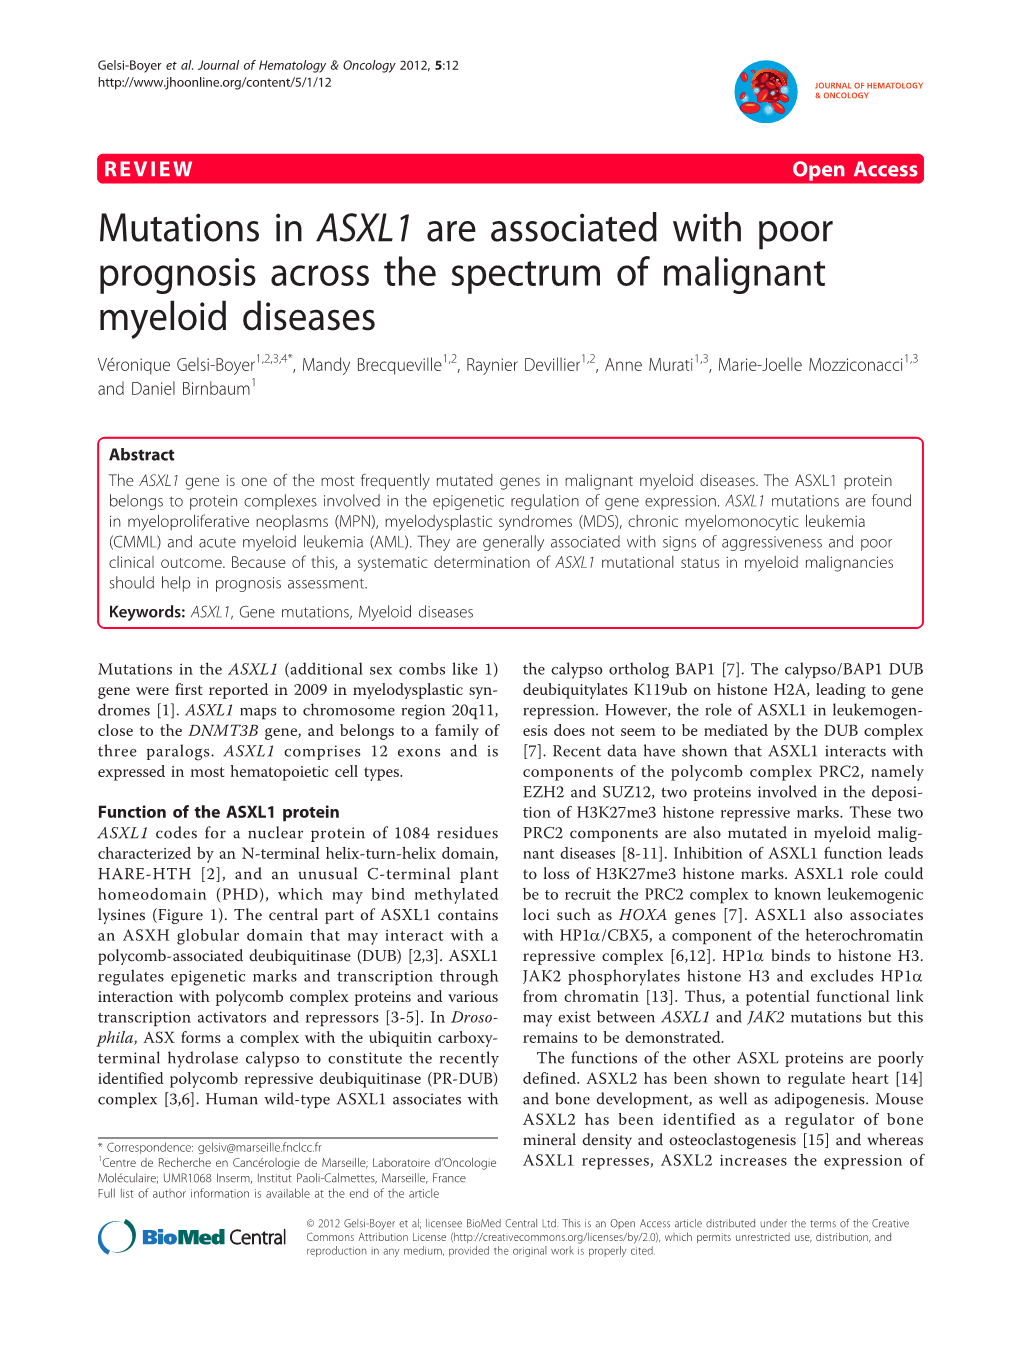 Mutations in ASXL1 Are Associated with Poor Prognosis Across The